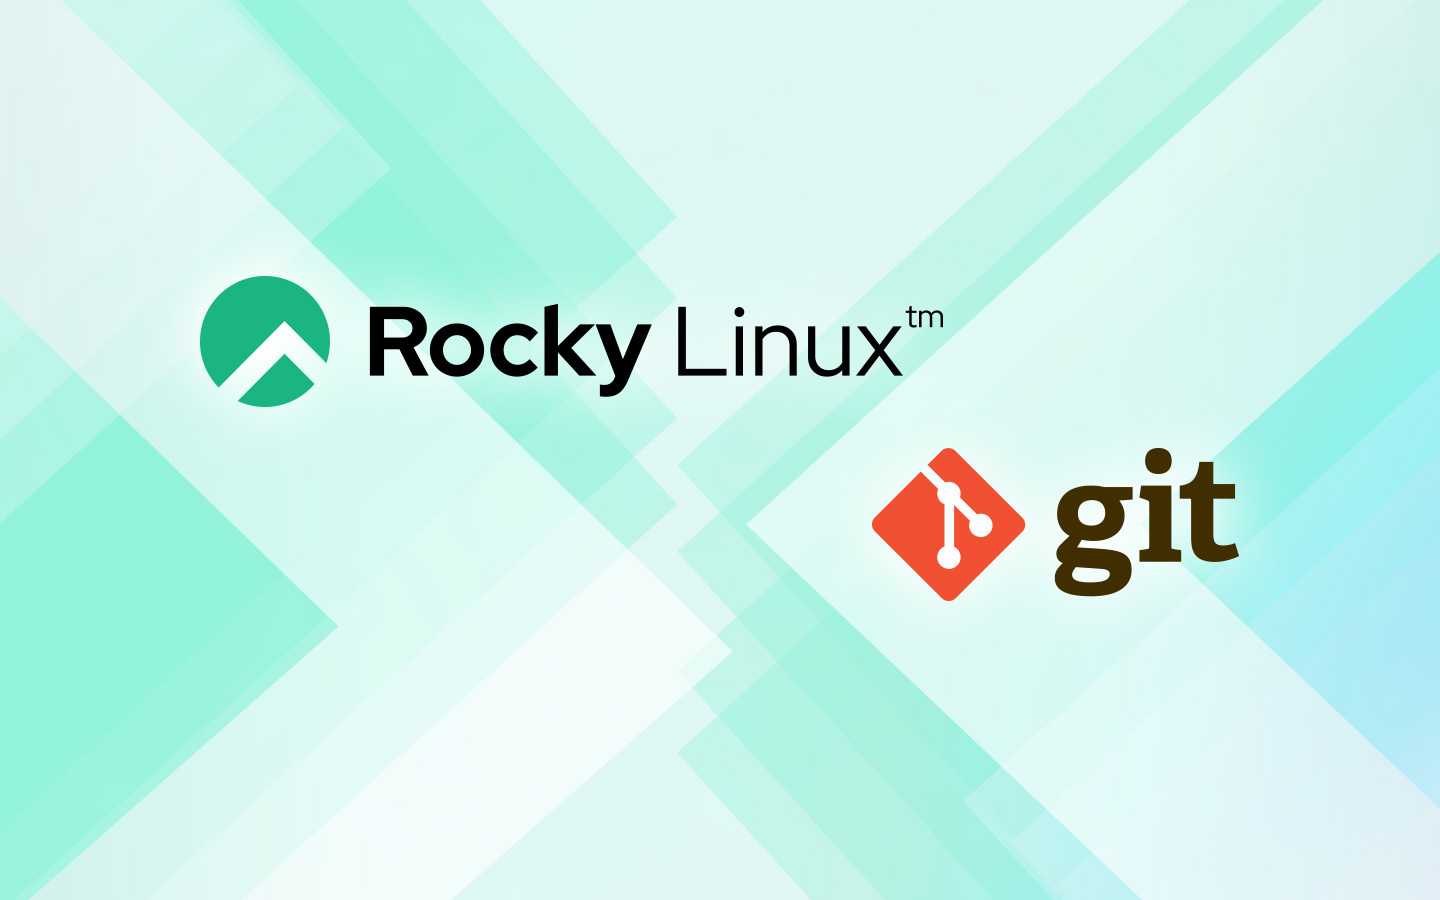 How to create a local Git repository on Rocky Linux with SSH